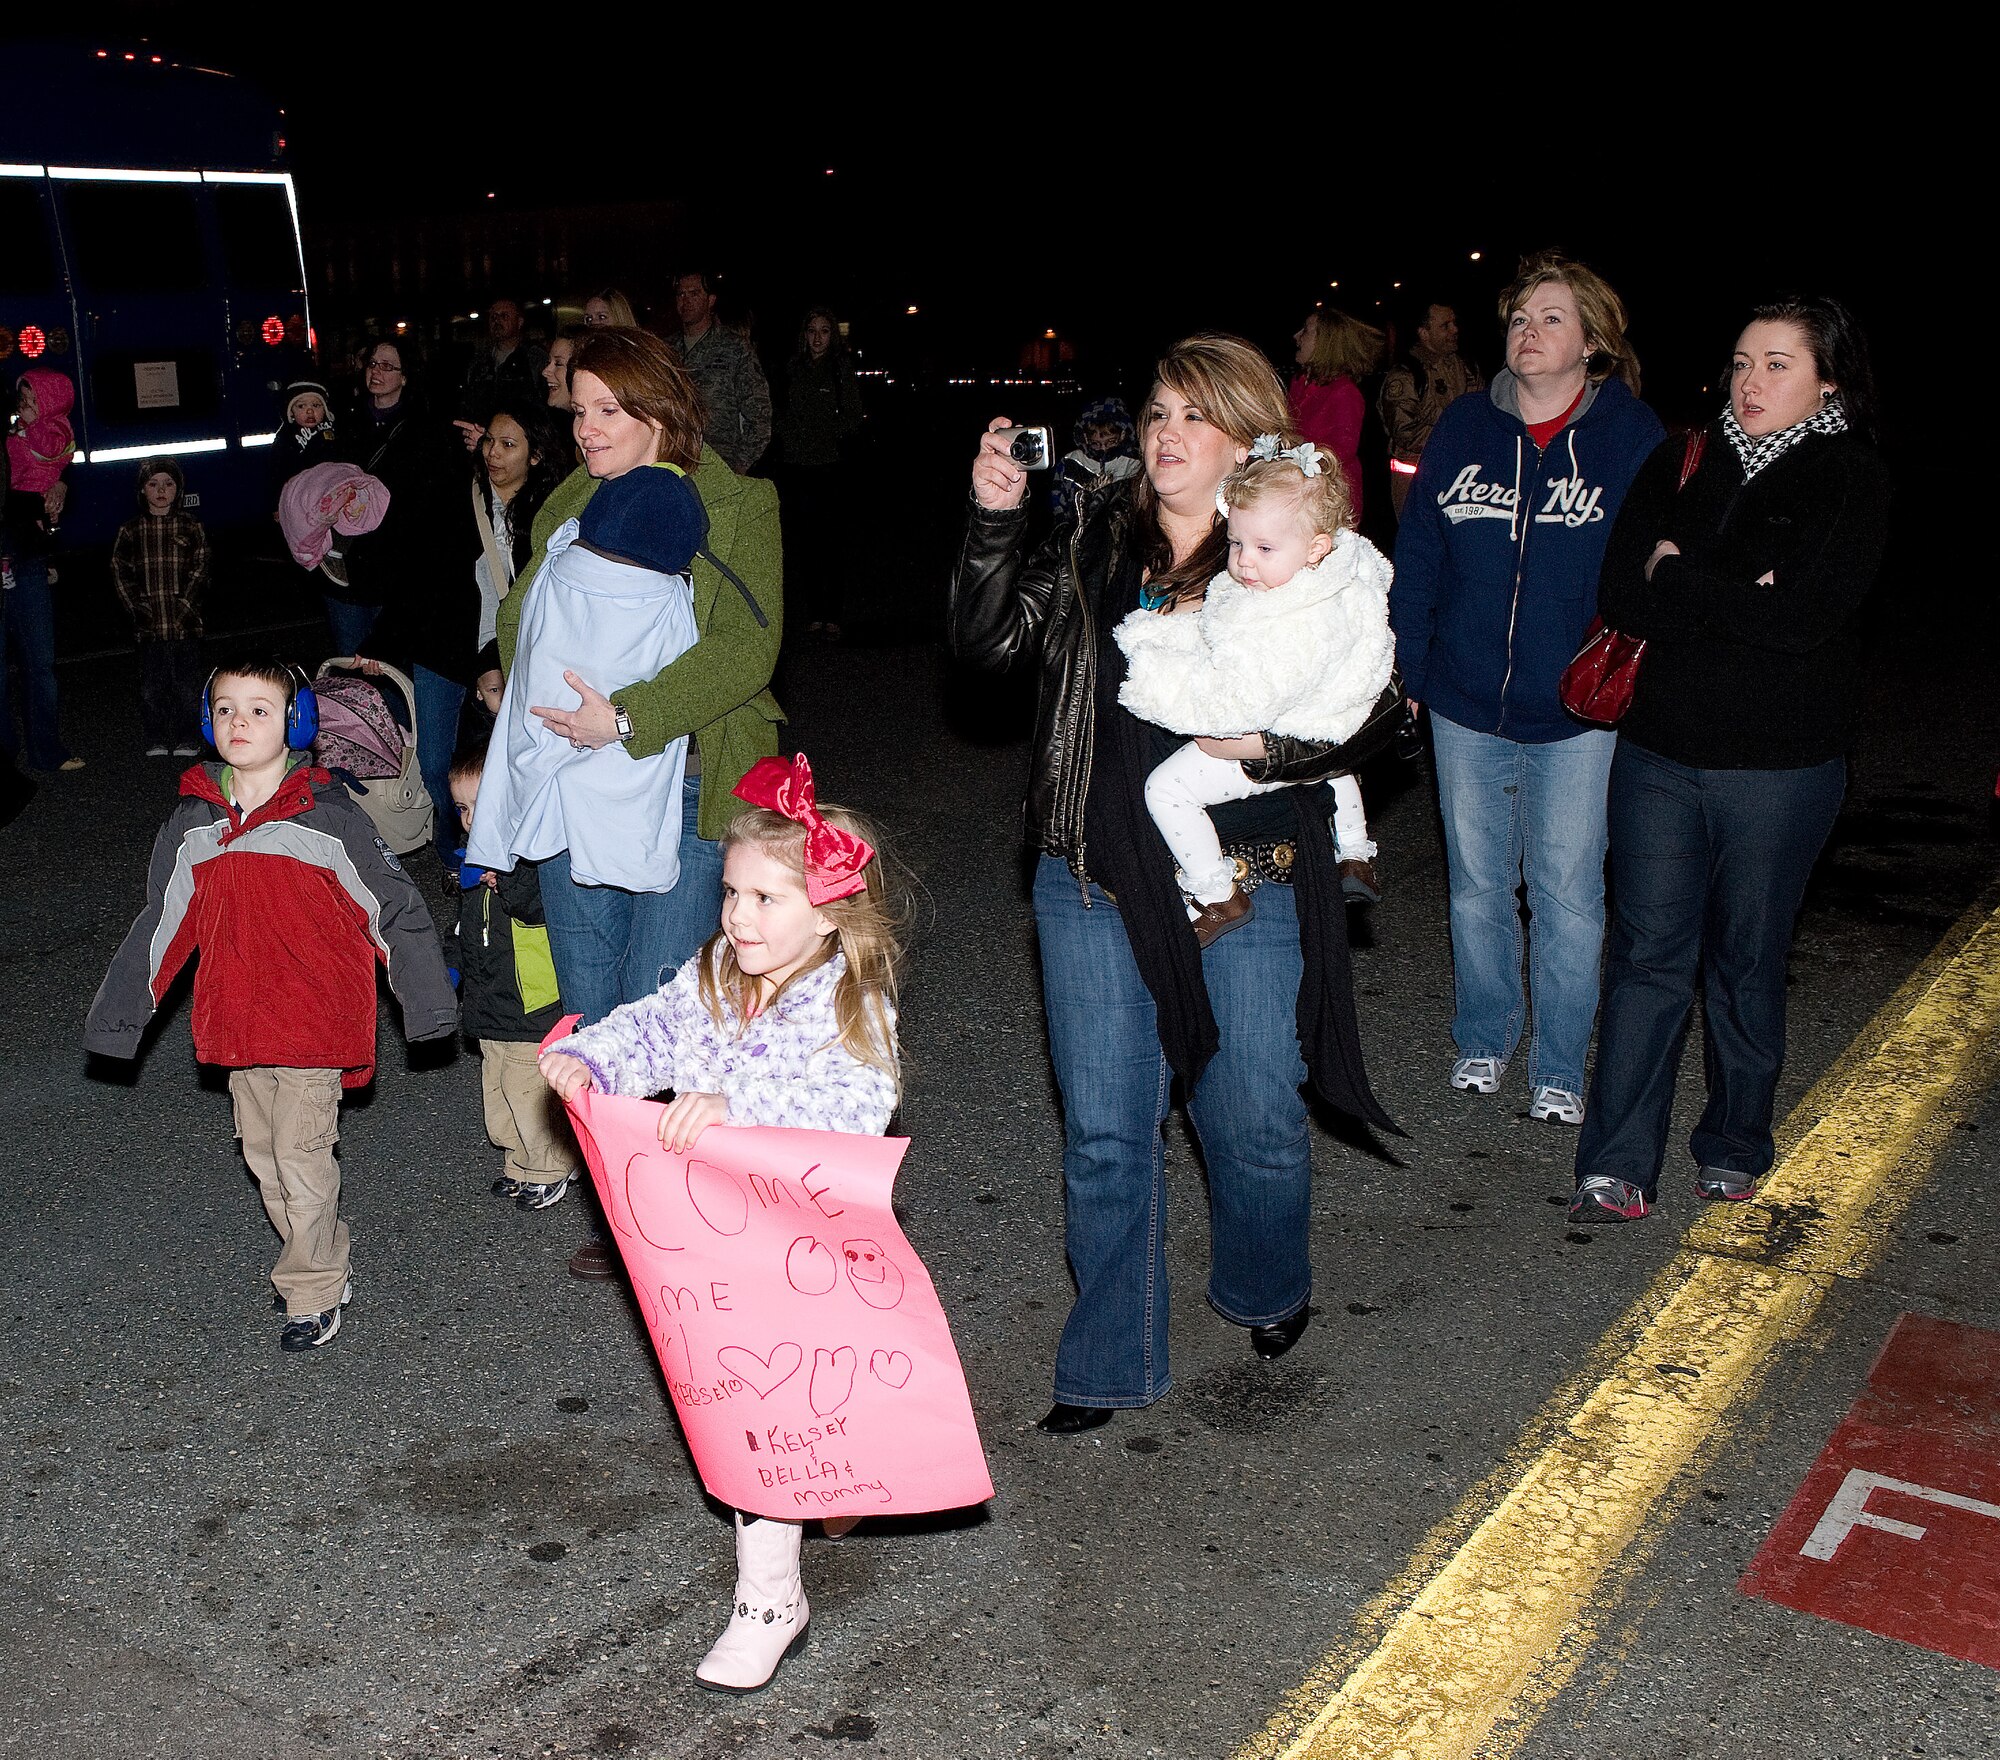 Family and friends rush to a C-5 as servicemembers exit the plane March 4, 2011 at Dover Air Force Base, Del. The servicemembers were deployed to Europe and the Middle East to support Operation Enduring Freedom. (U.S. Air Force photo by Jason Minto)